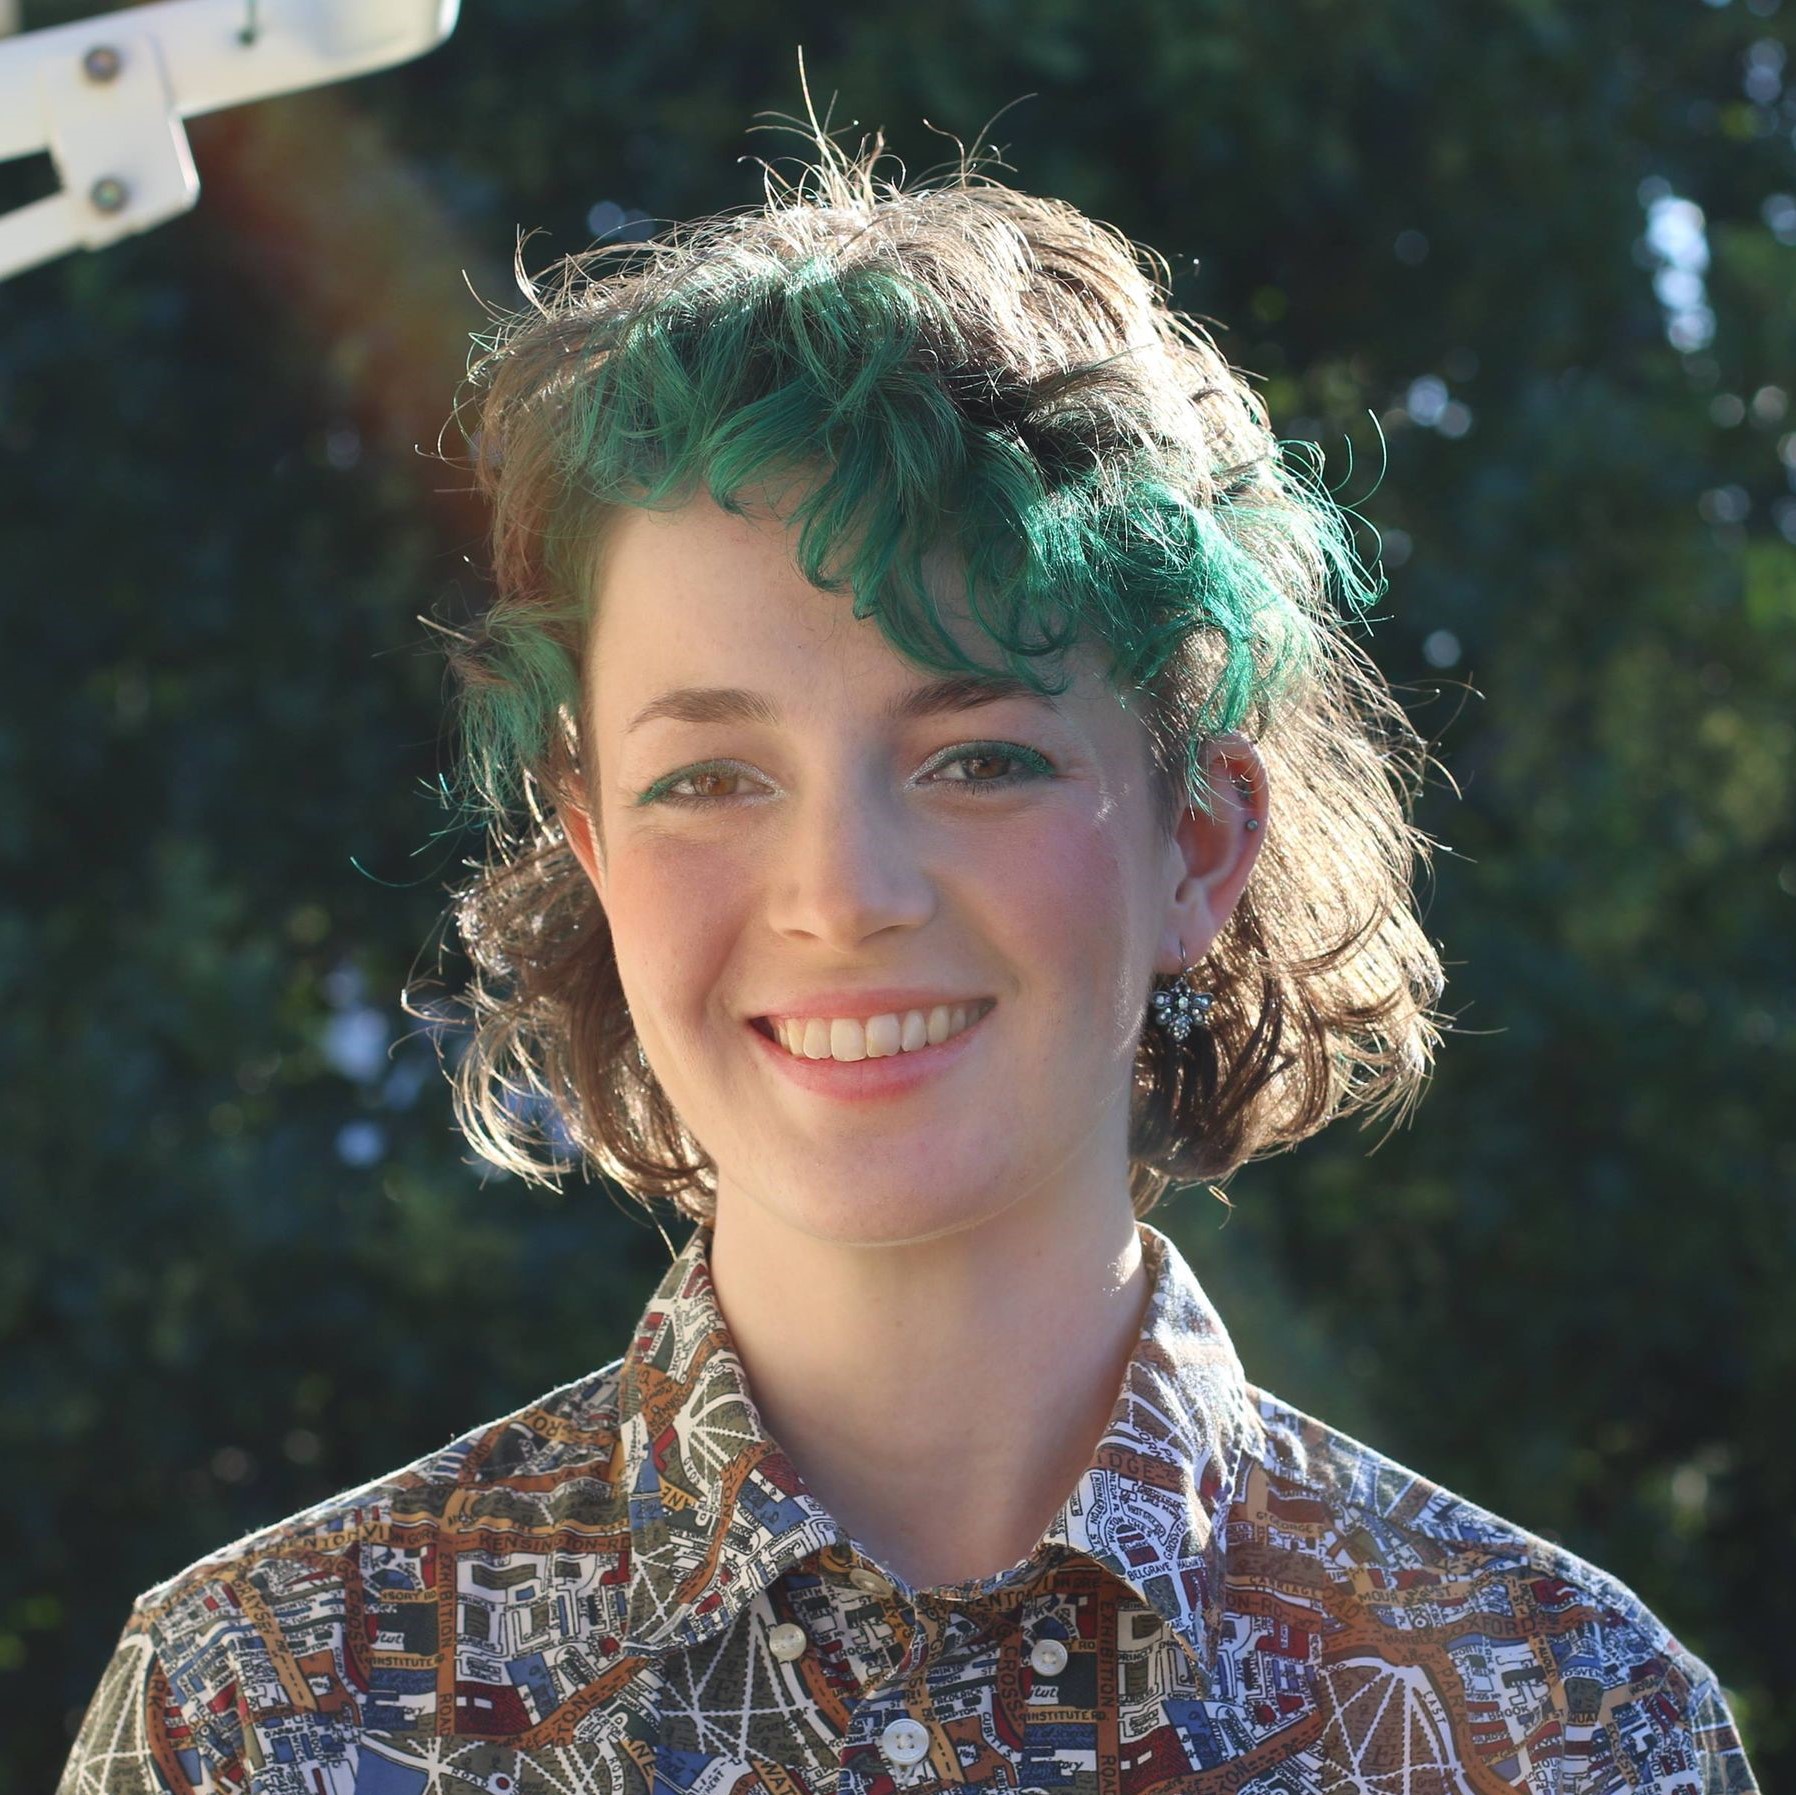 Ellie Kaddatz stands smiling outside in the sun. Her hair is coloured green at the fringe and she wears a patterned shirt. 